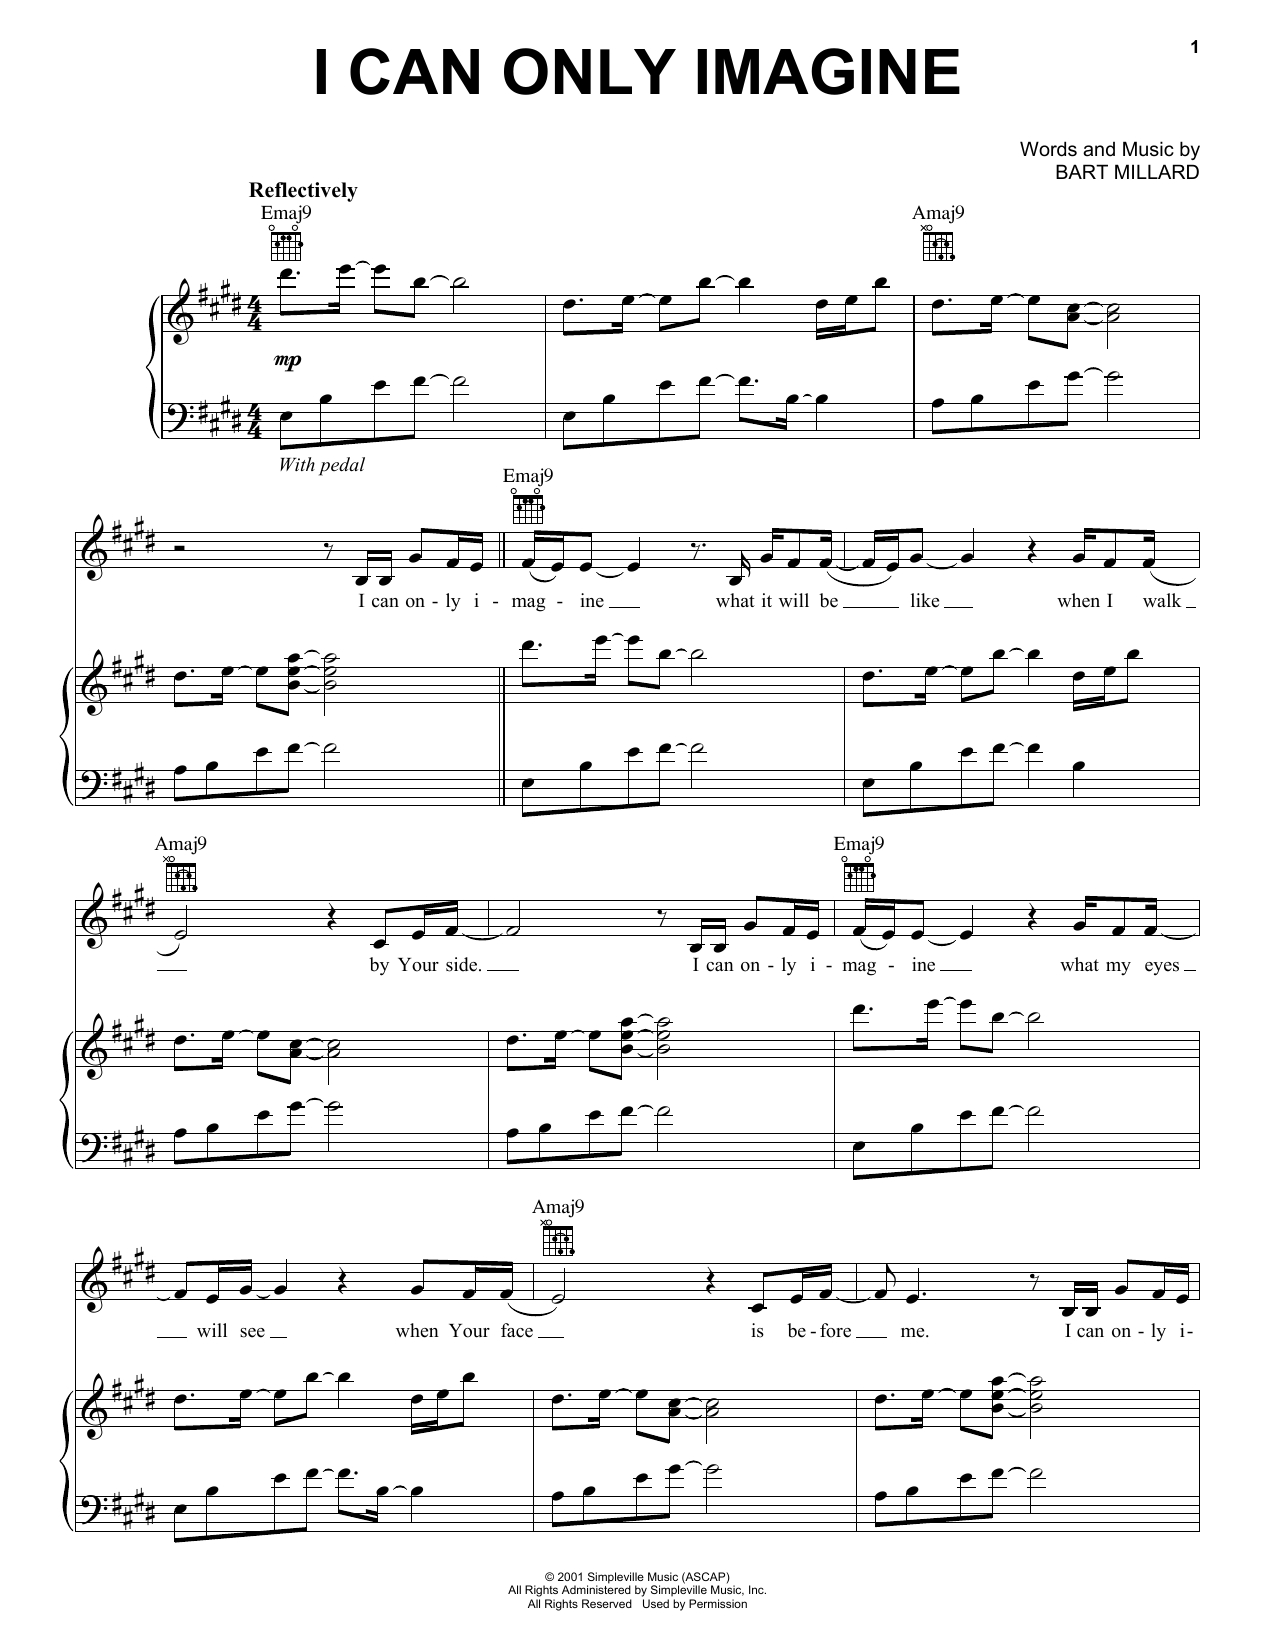 I Can Only Imagine Chords Sheet Music Digital Files To Print Licensed Mercy Me Digital Sheet